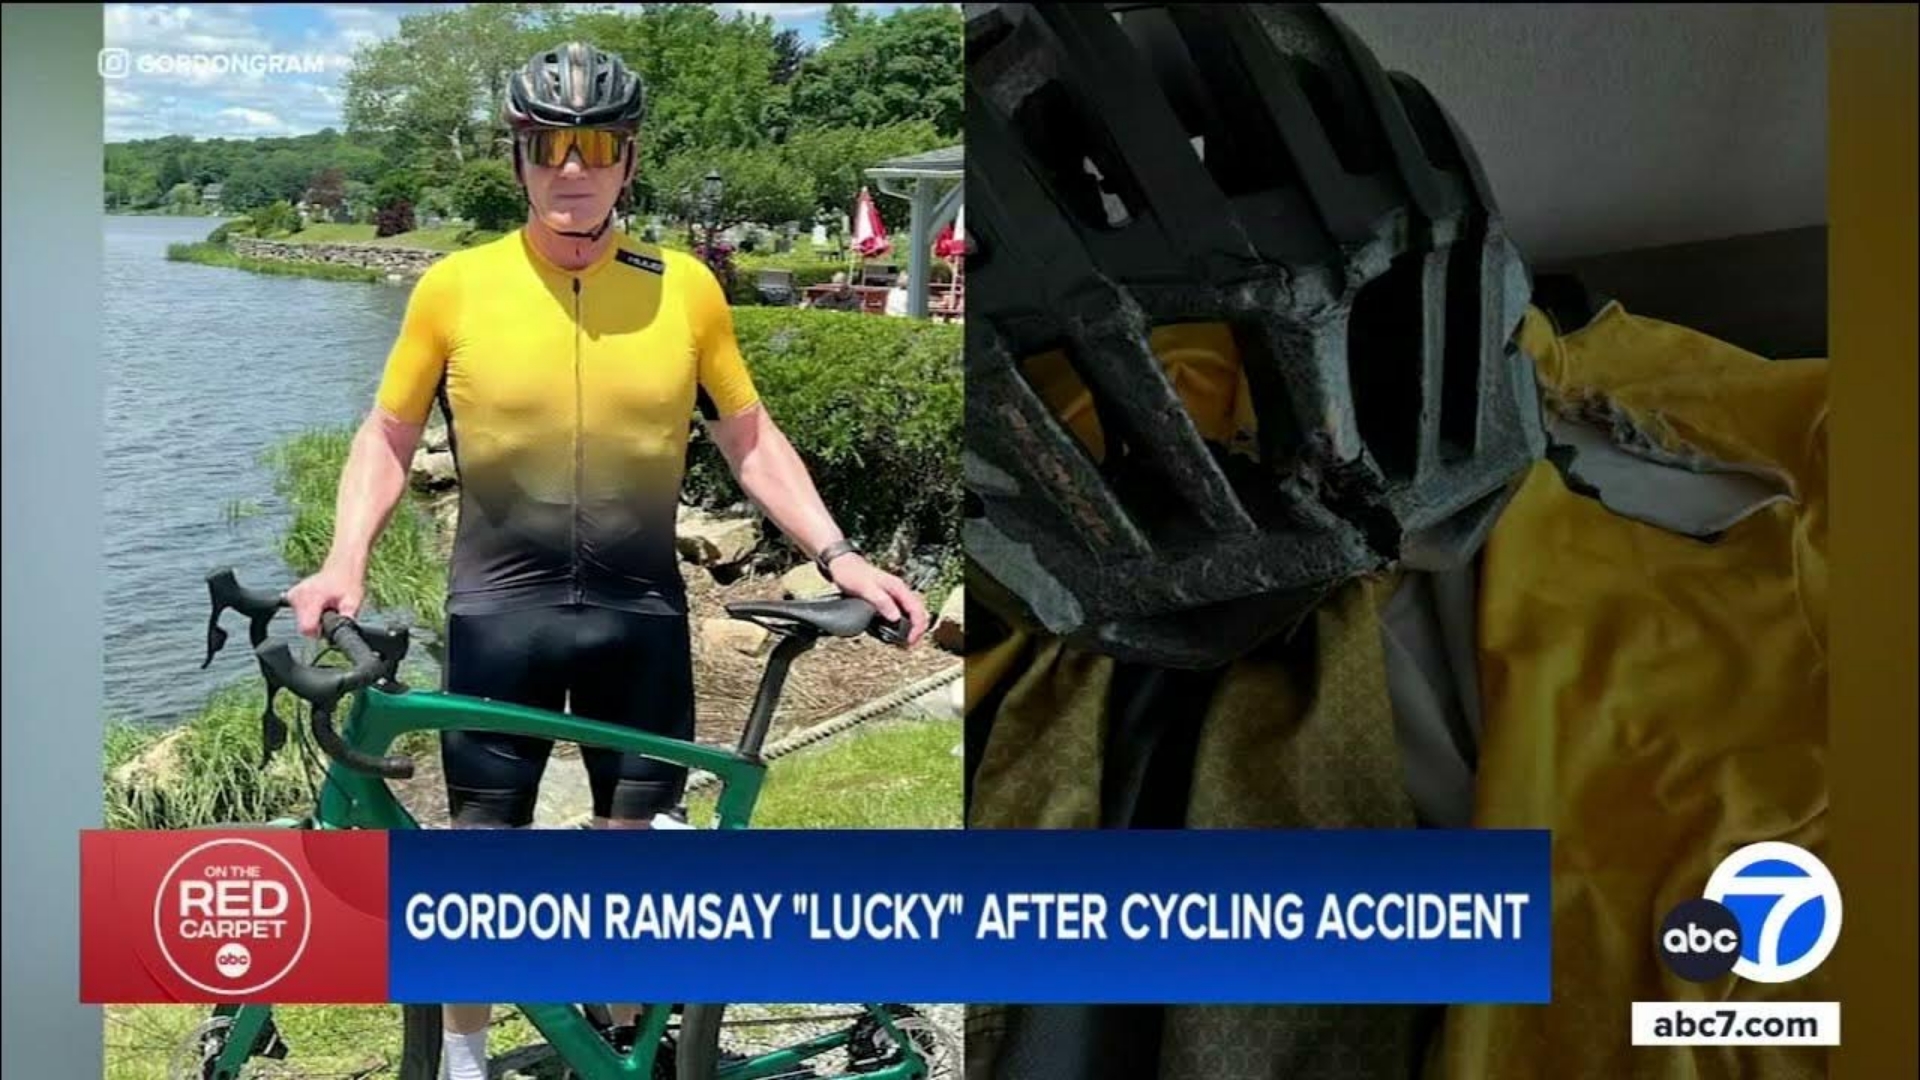 Gordon Ramsay had severe bruises after a nearly fatal bike accident.